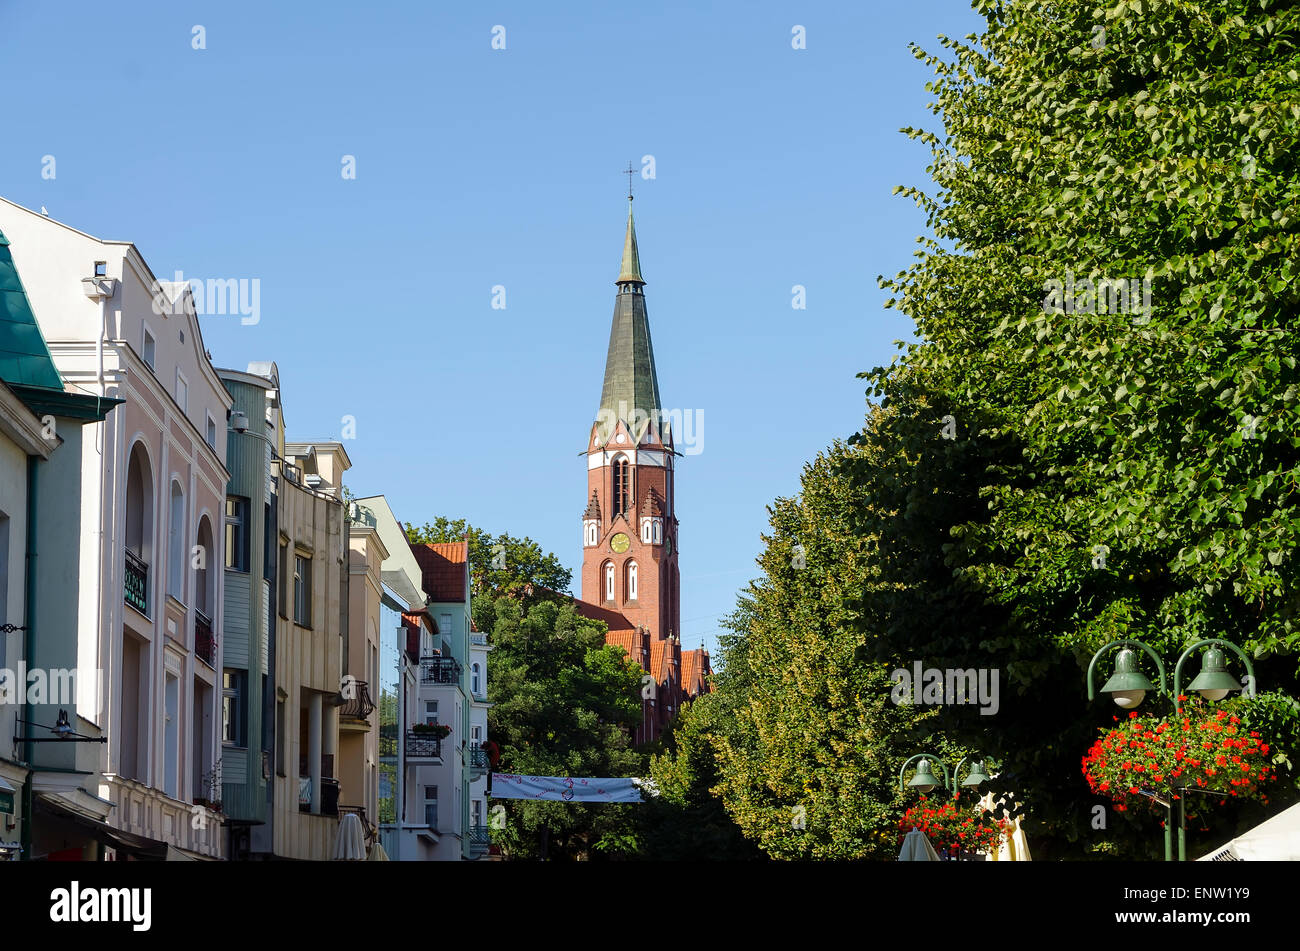 Bohaterow Monte Cassino Street with trees St George's Church and storefronts Sopot Poland Stock Photo